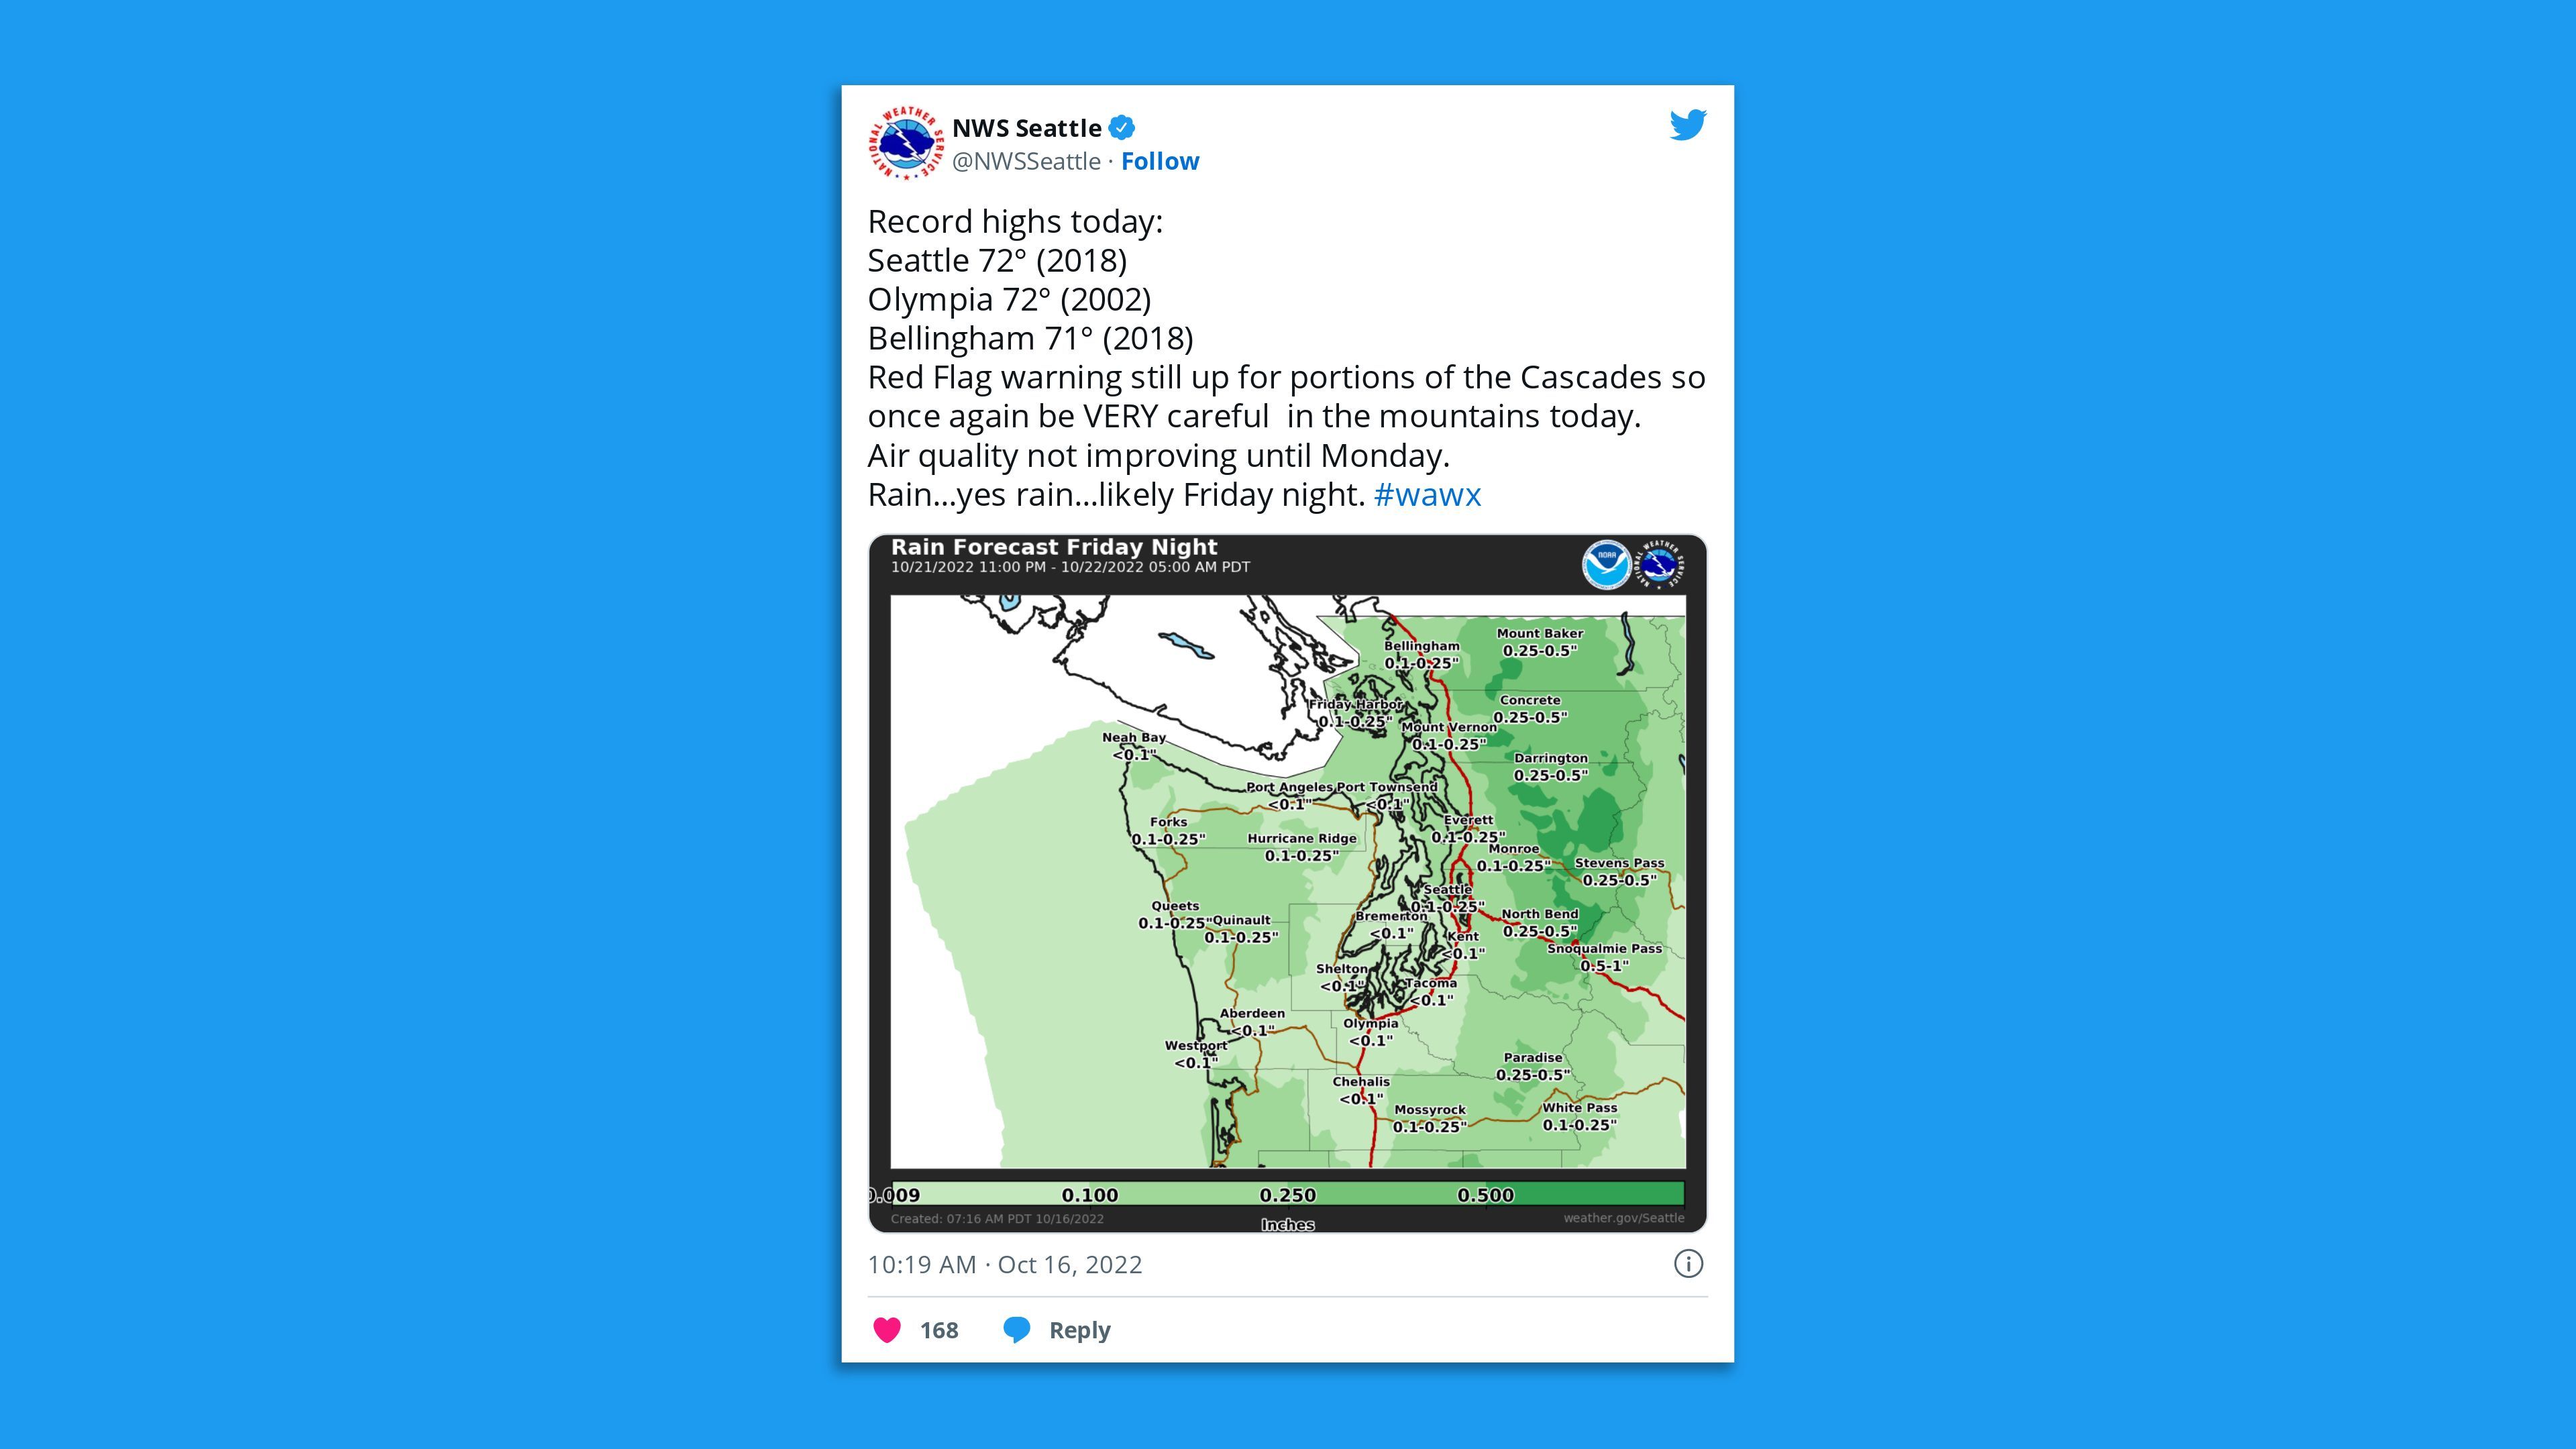 The NWS tweet on record high temperatures in Washington state, including 72F in Seattle.